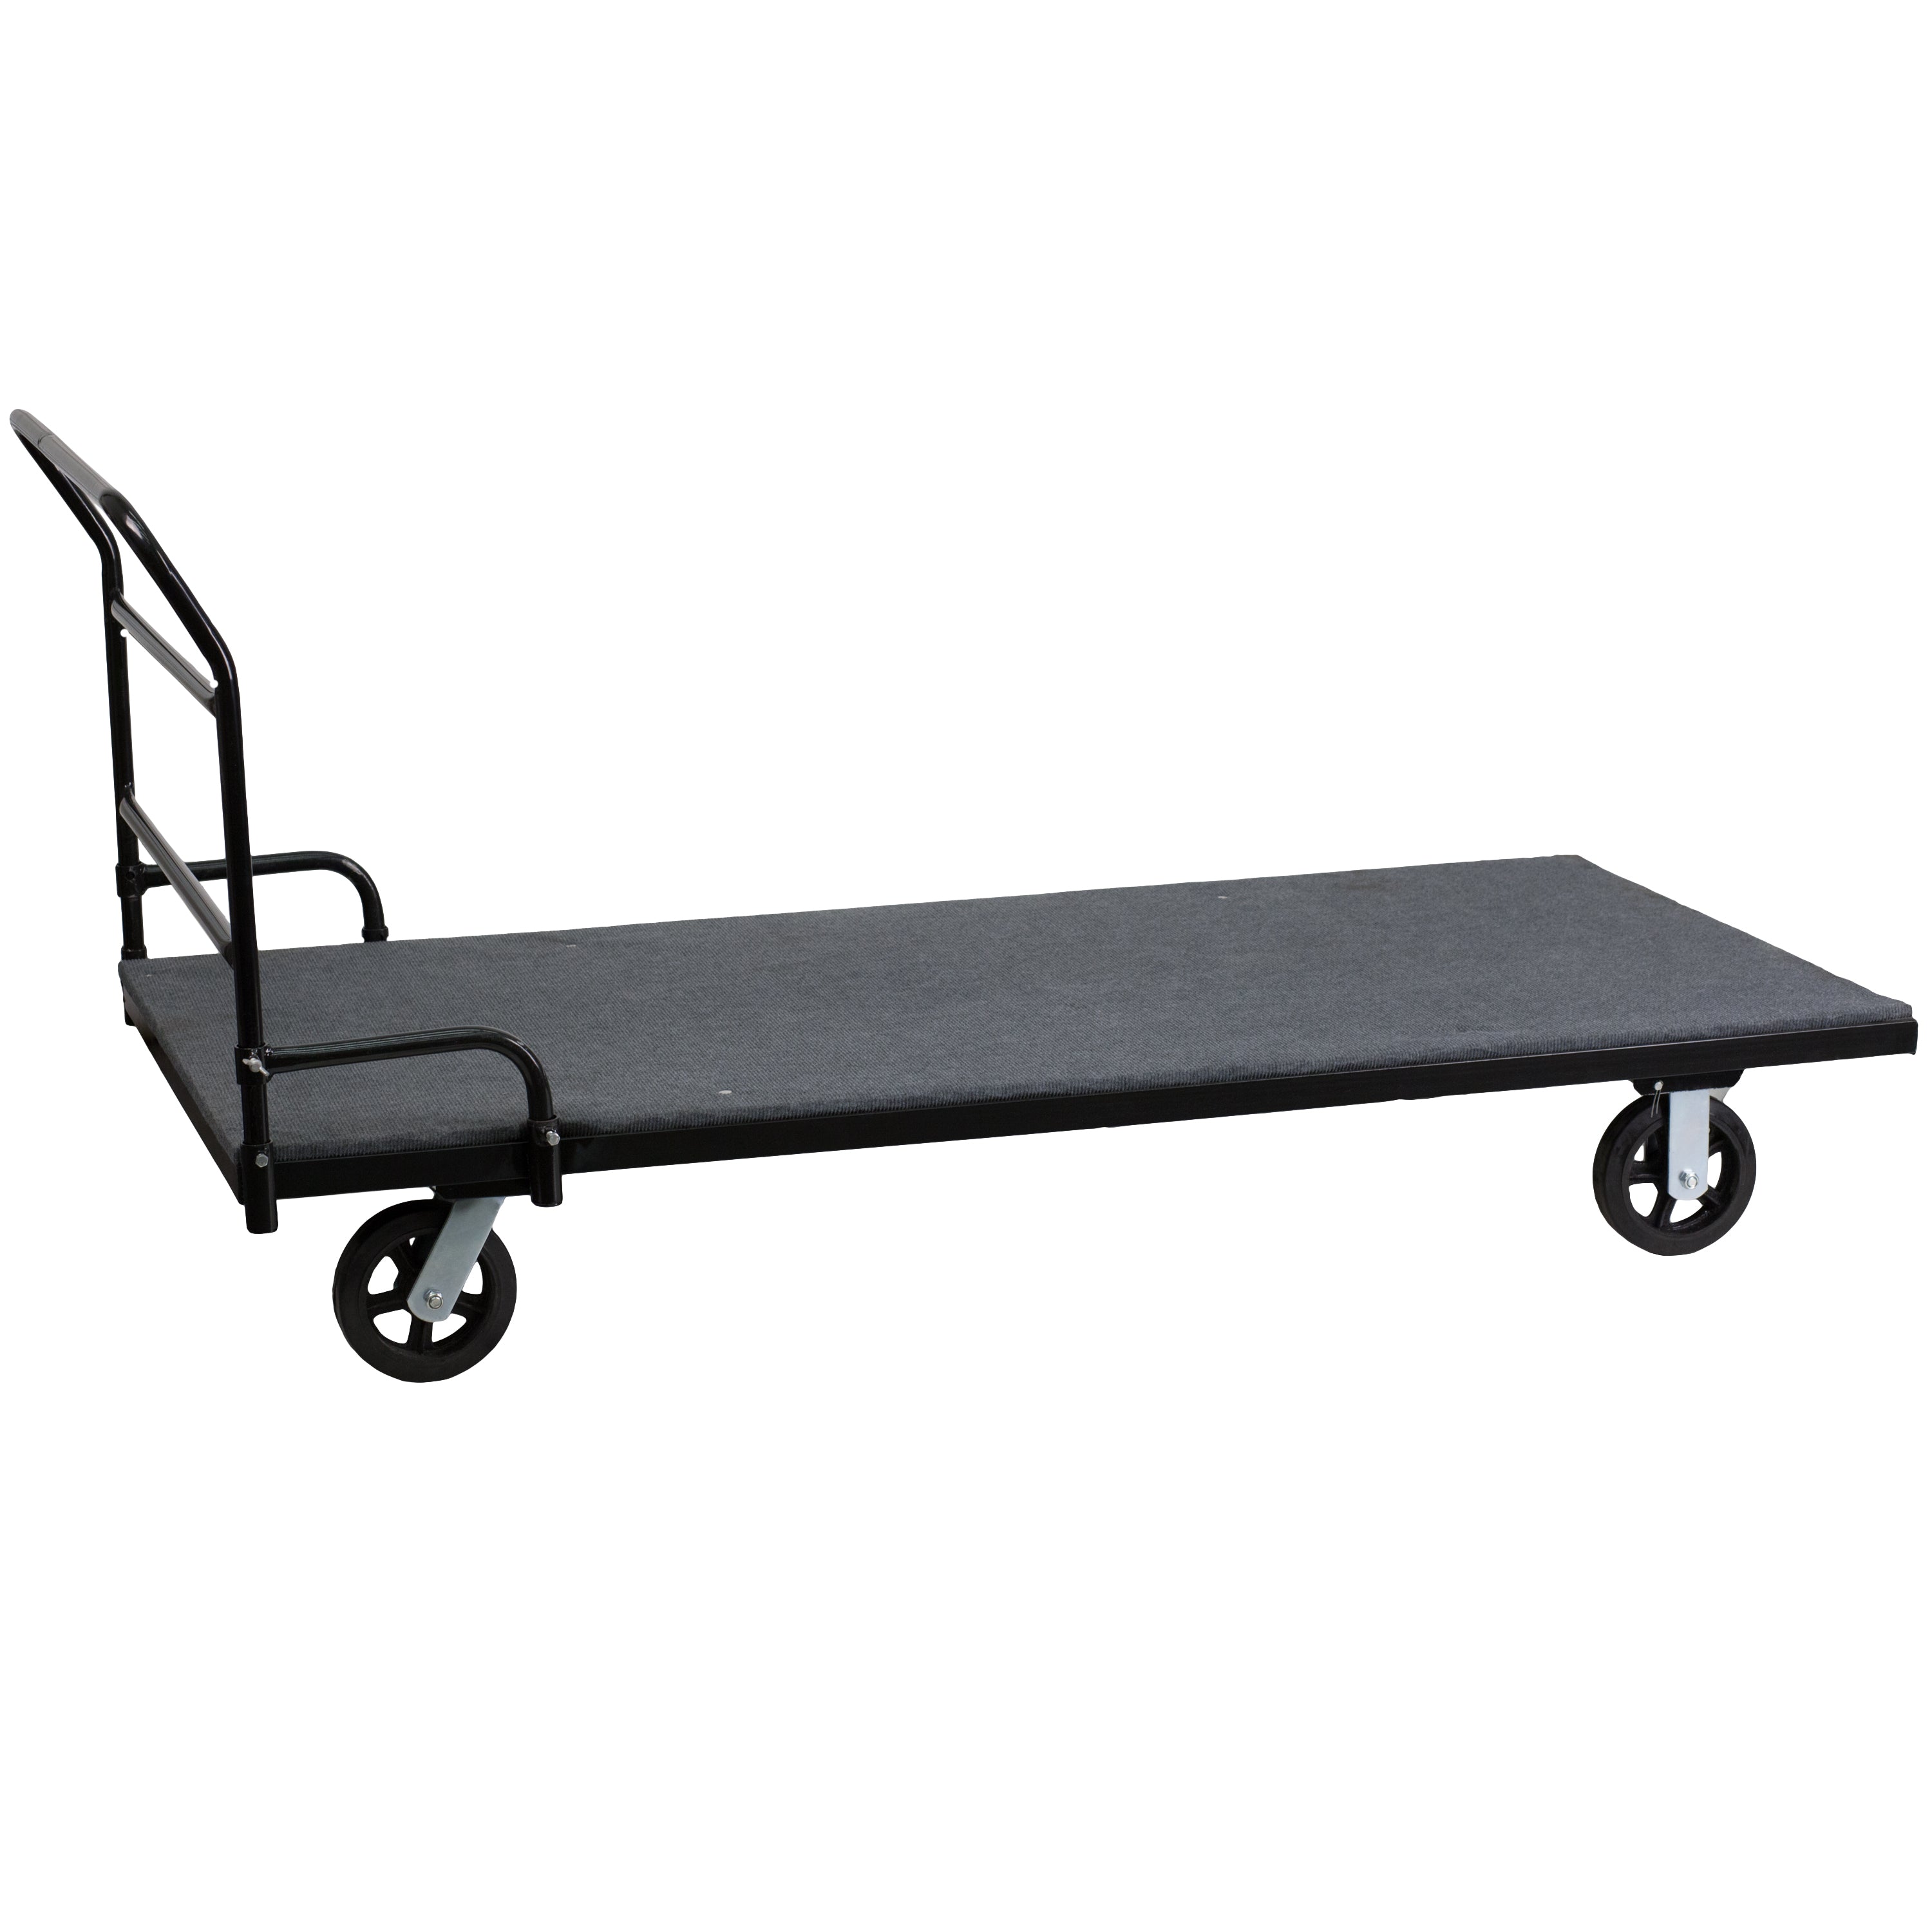 Folding Table Dolly with Carpeted Platform for Rectangular Tables-Folding Table Dollies-Flash Furniture-Wall2Wall Furnishings